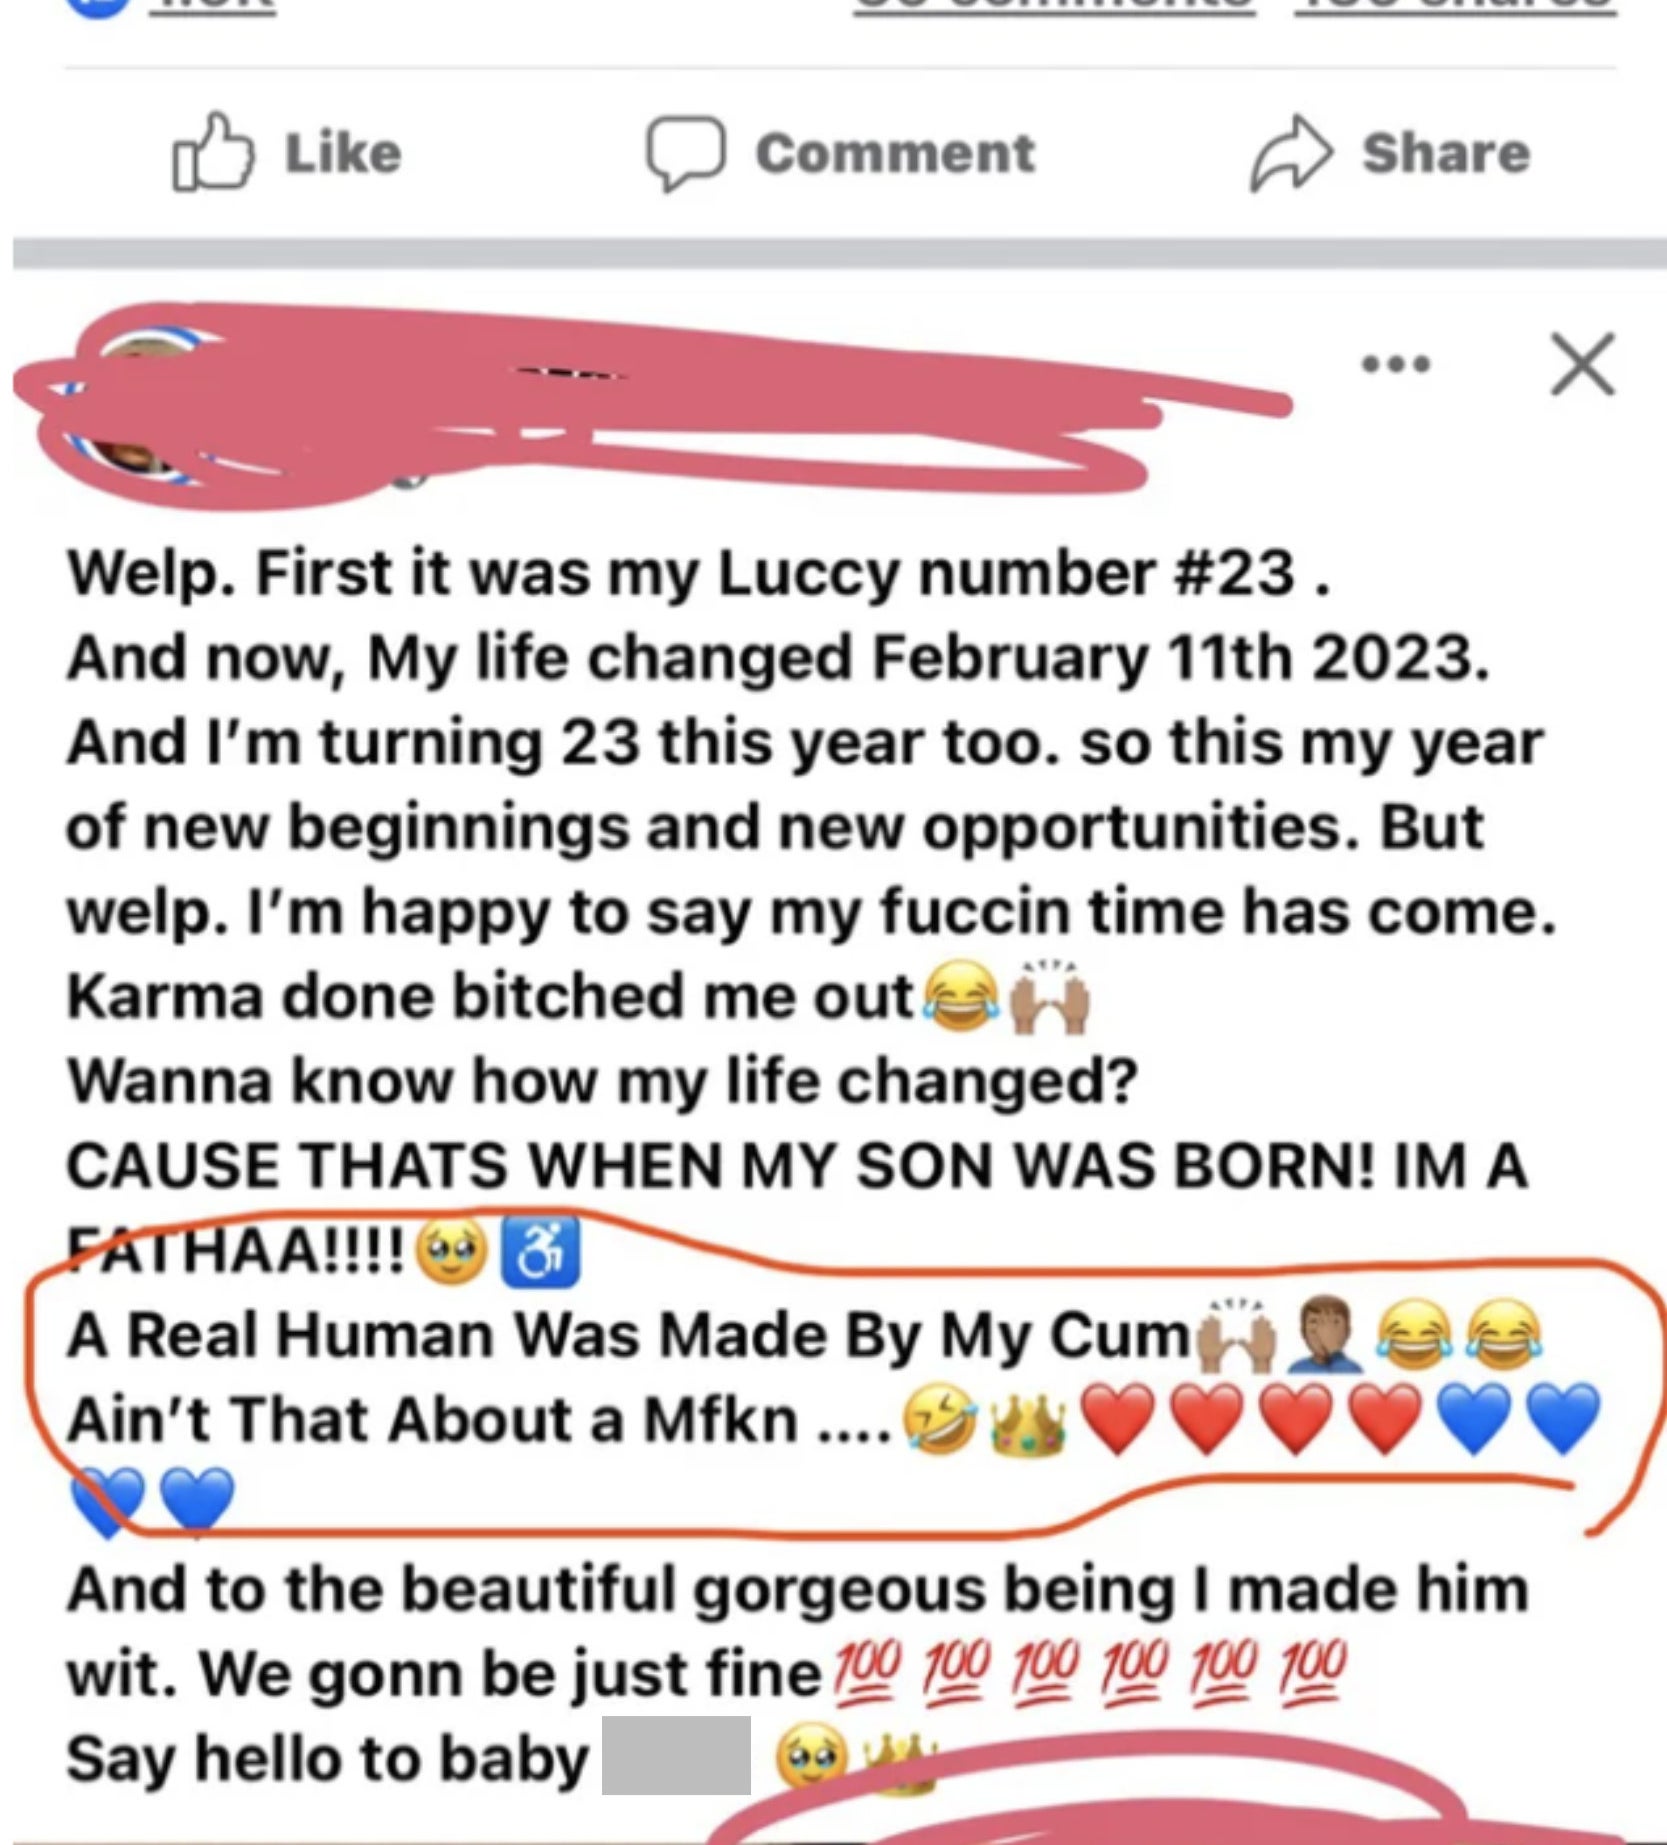 guy posting that he made a human with his cum